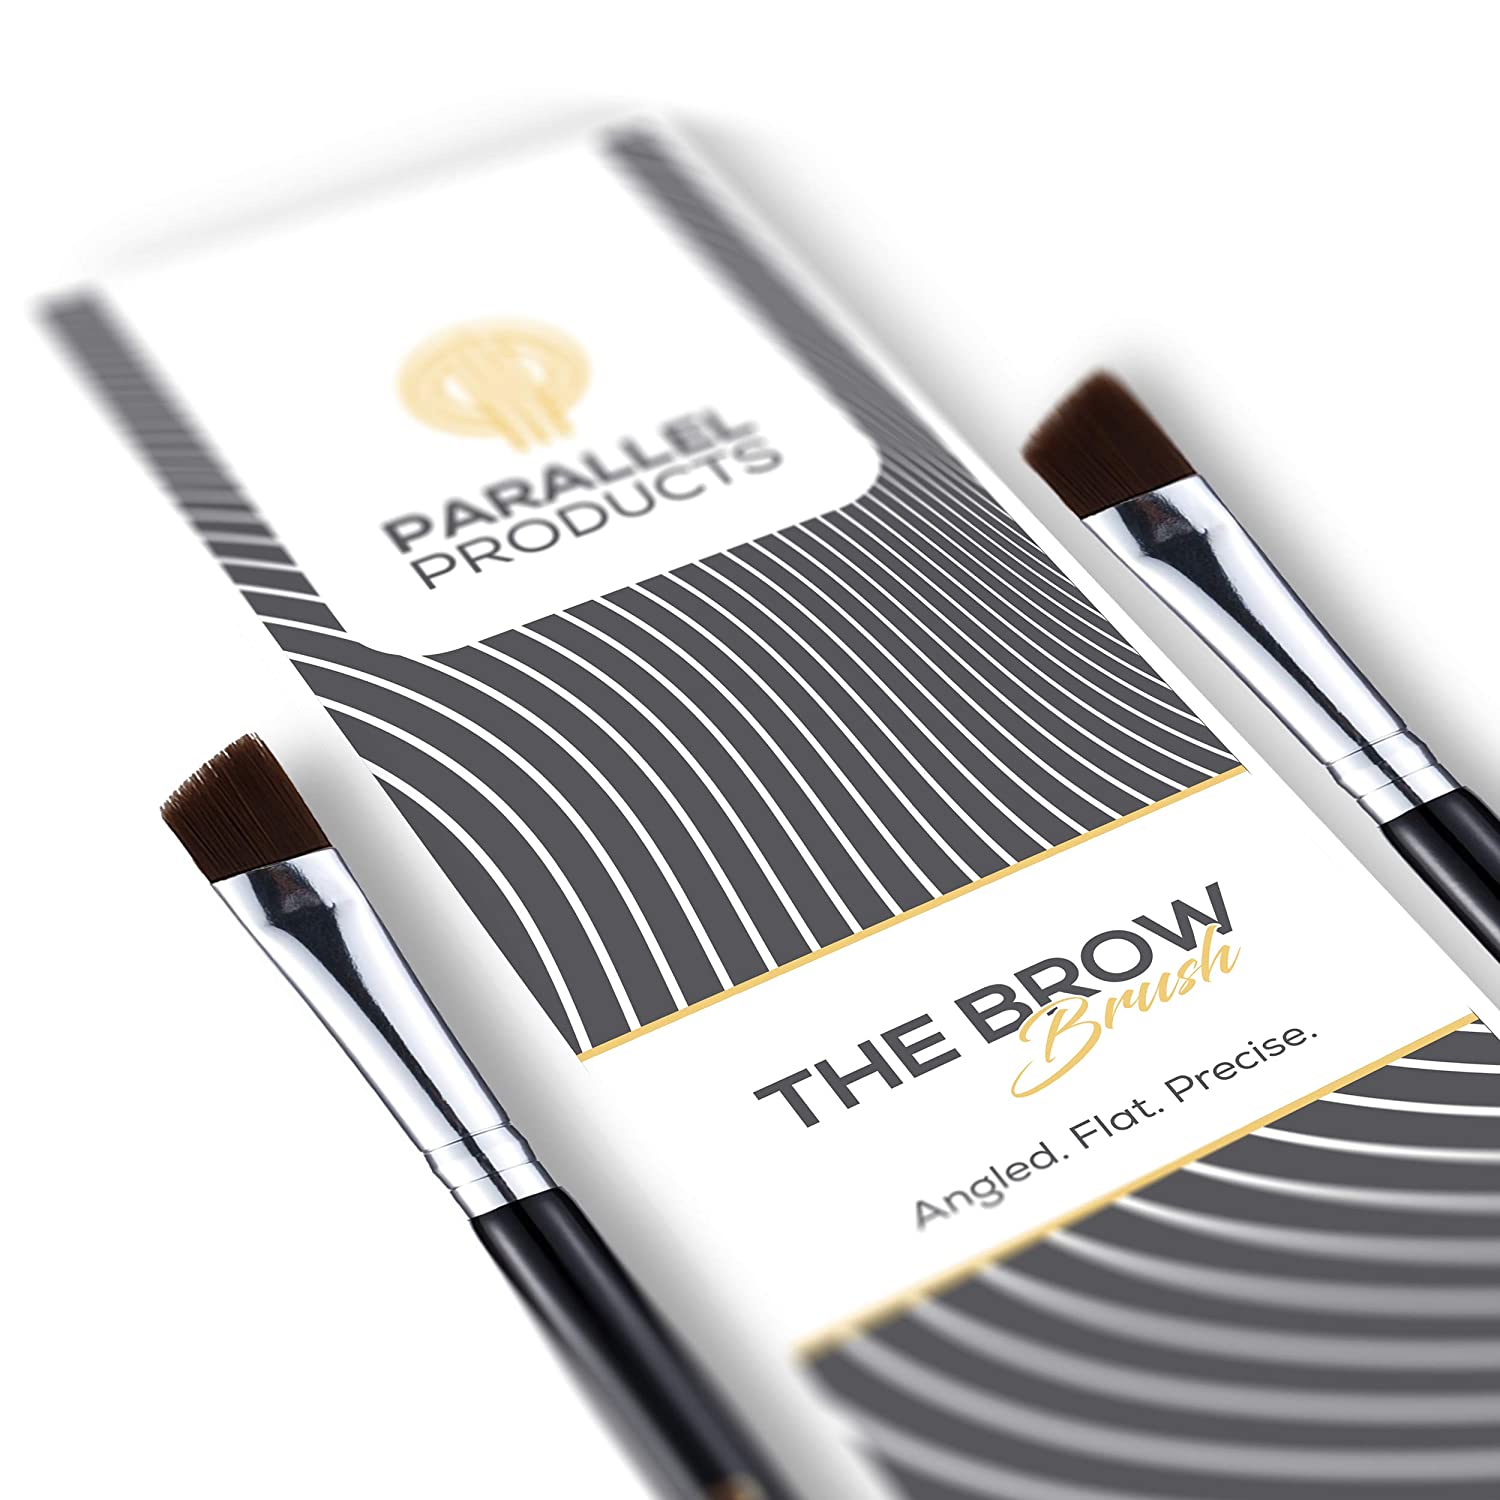 Parallel Products The Brow Brush Premium Angled Brow Brush Makeup Brush 2 Pack Close Up